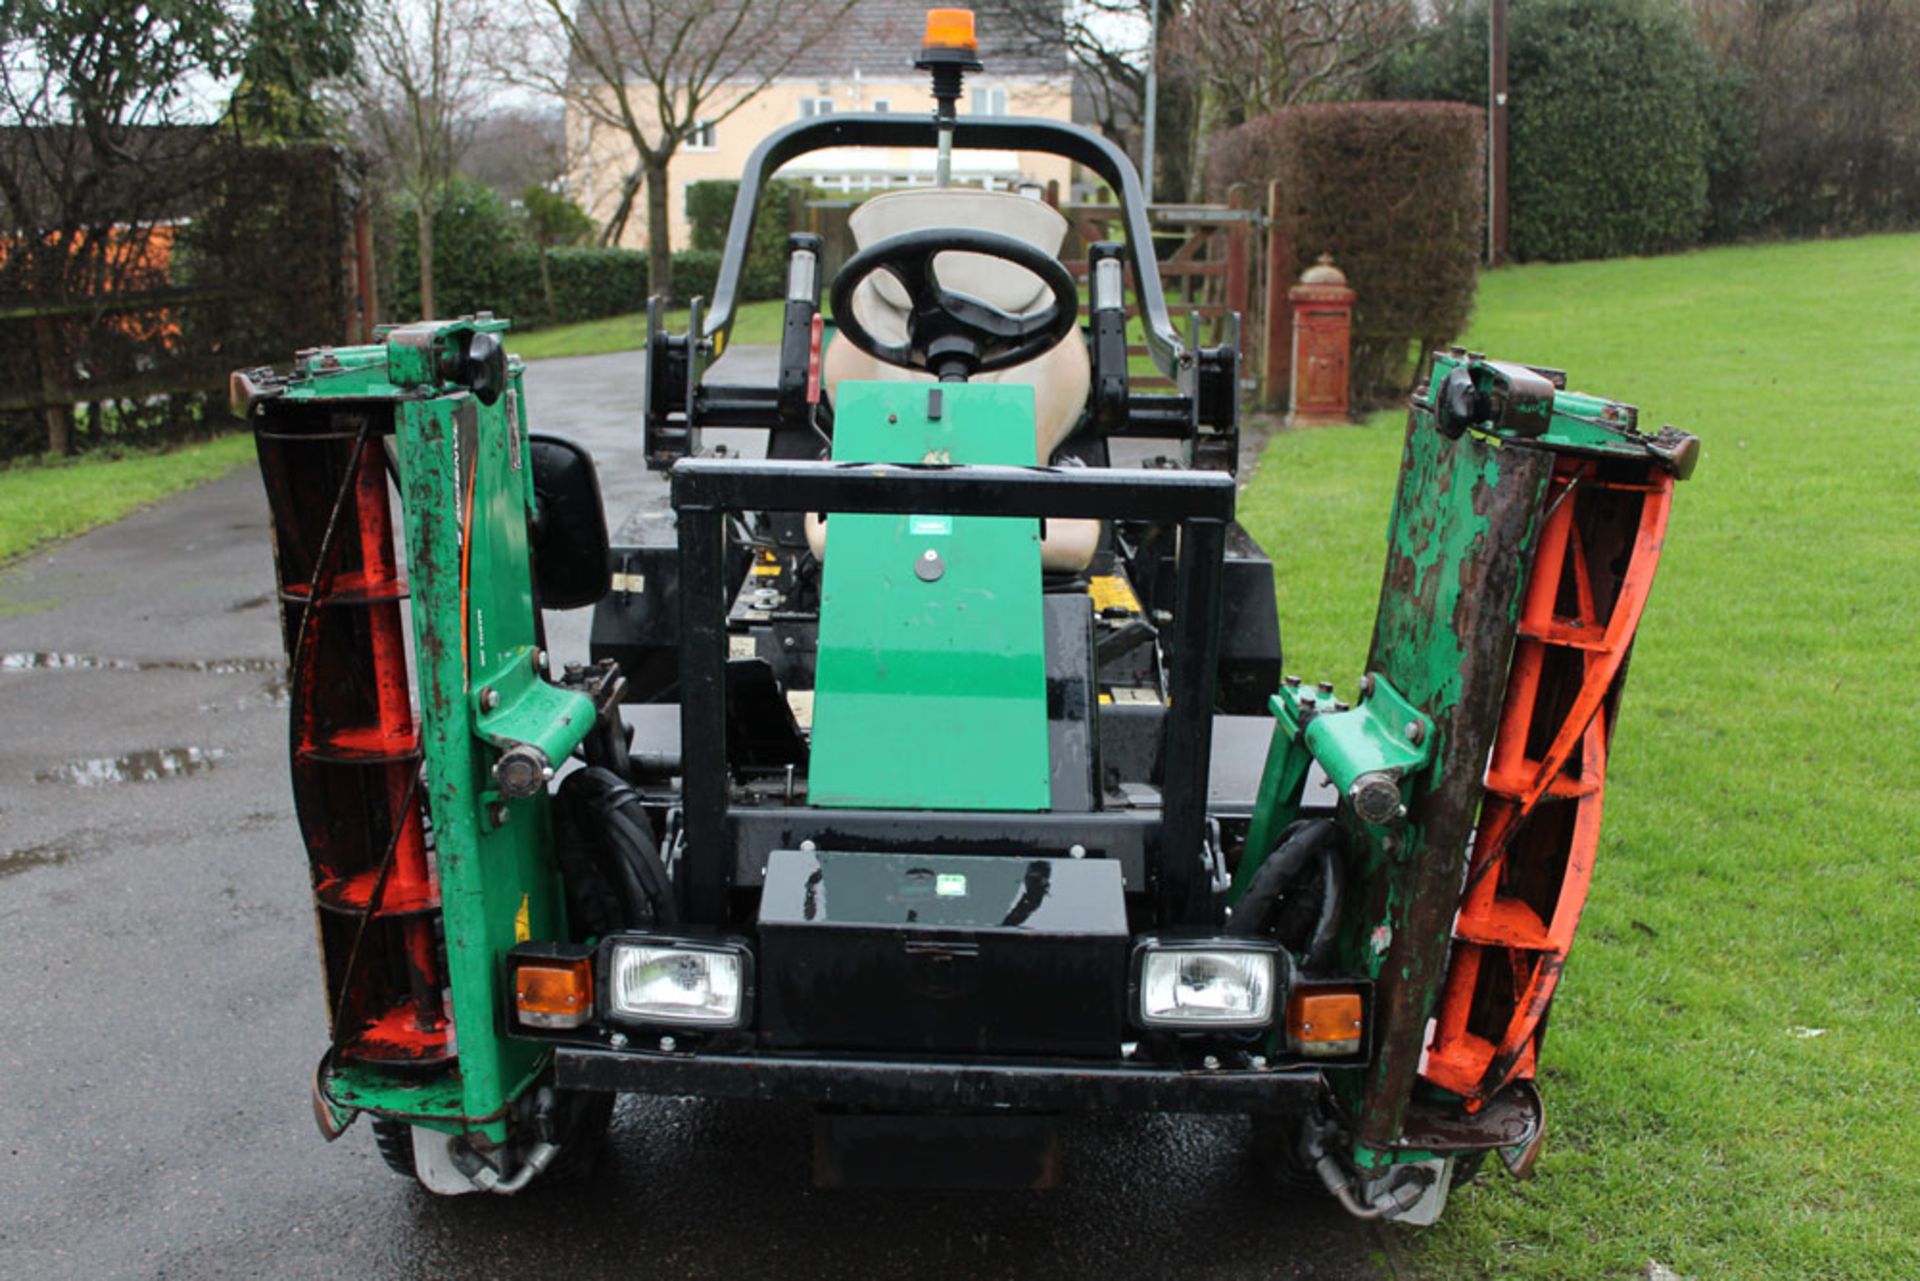 2010 Ransomes Parkway 2250 Plus Ride On Cylinder Mower - Image 2 of 8